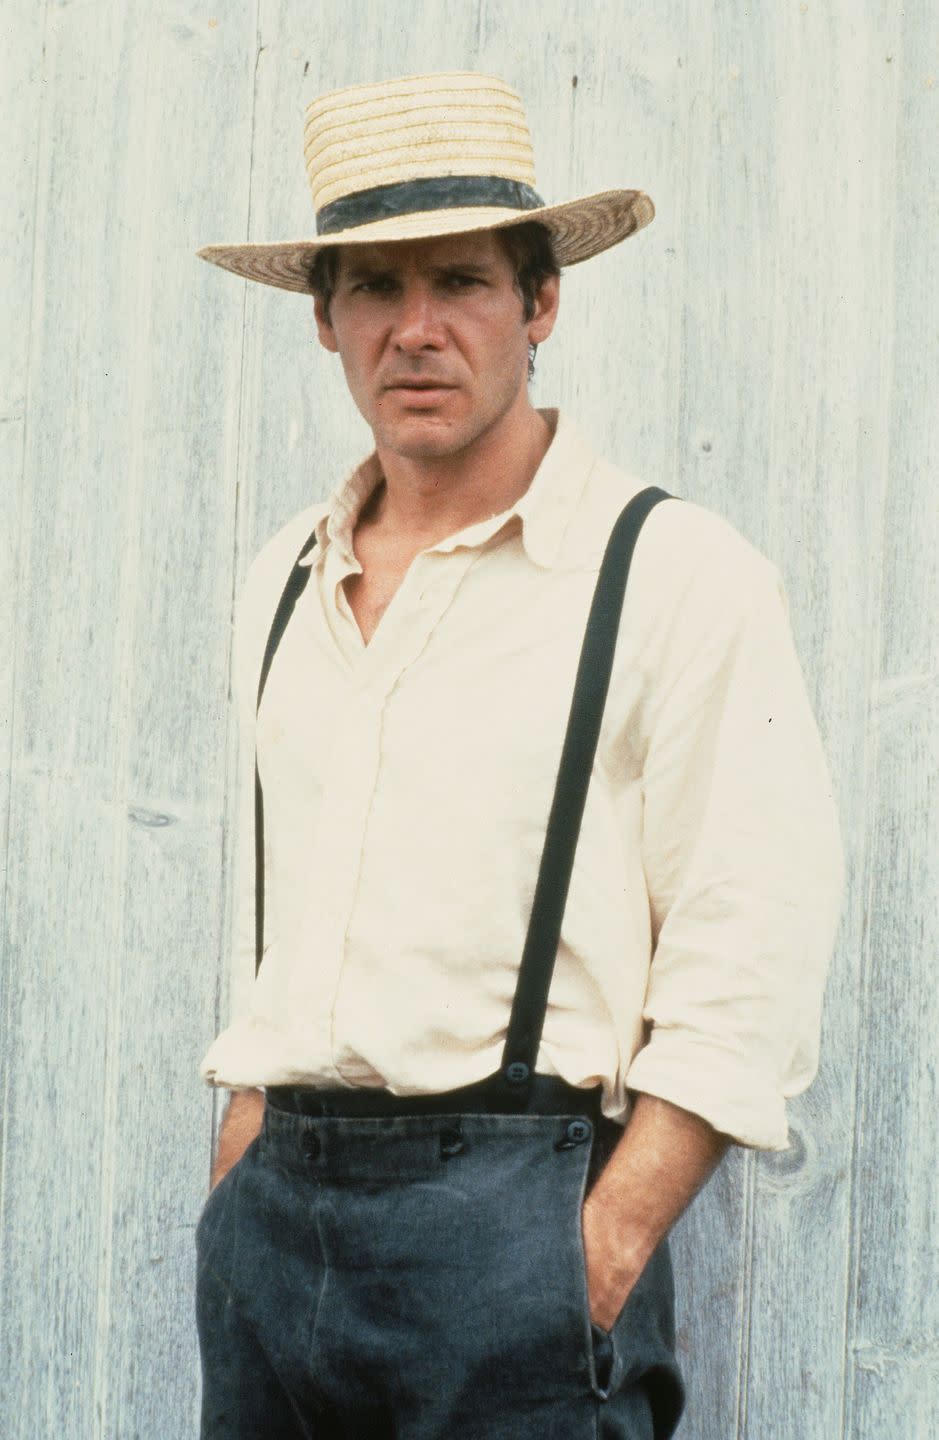 THEN: Harrison Ford